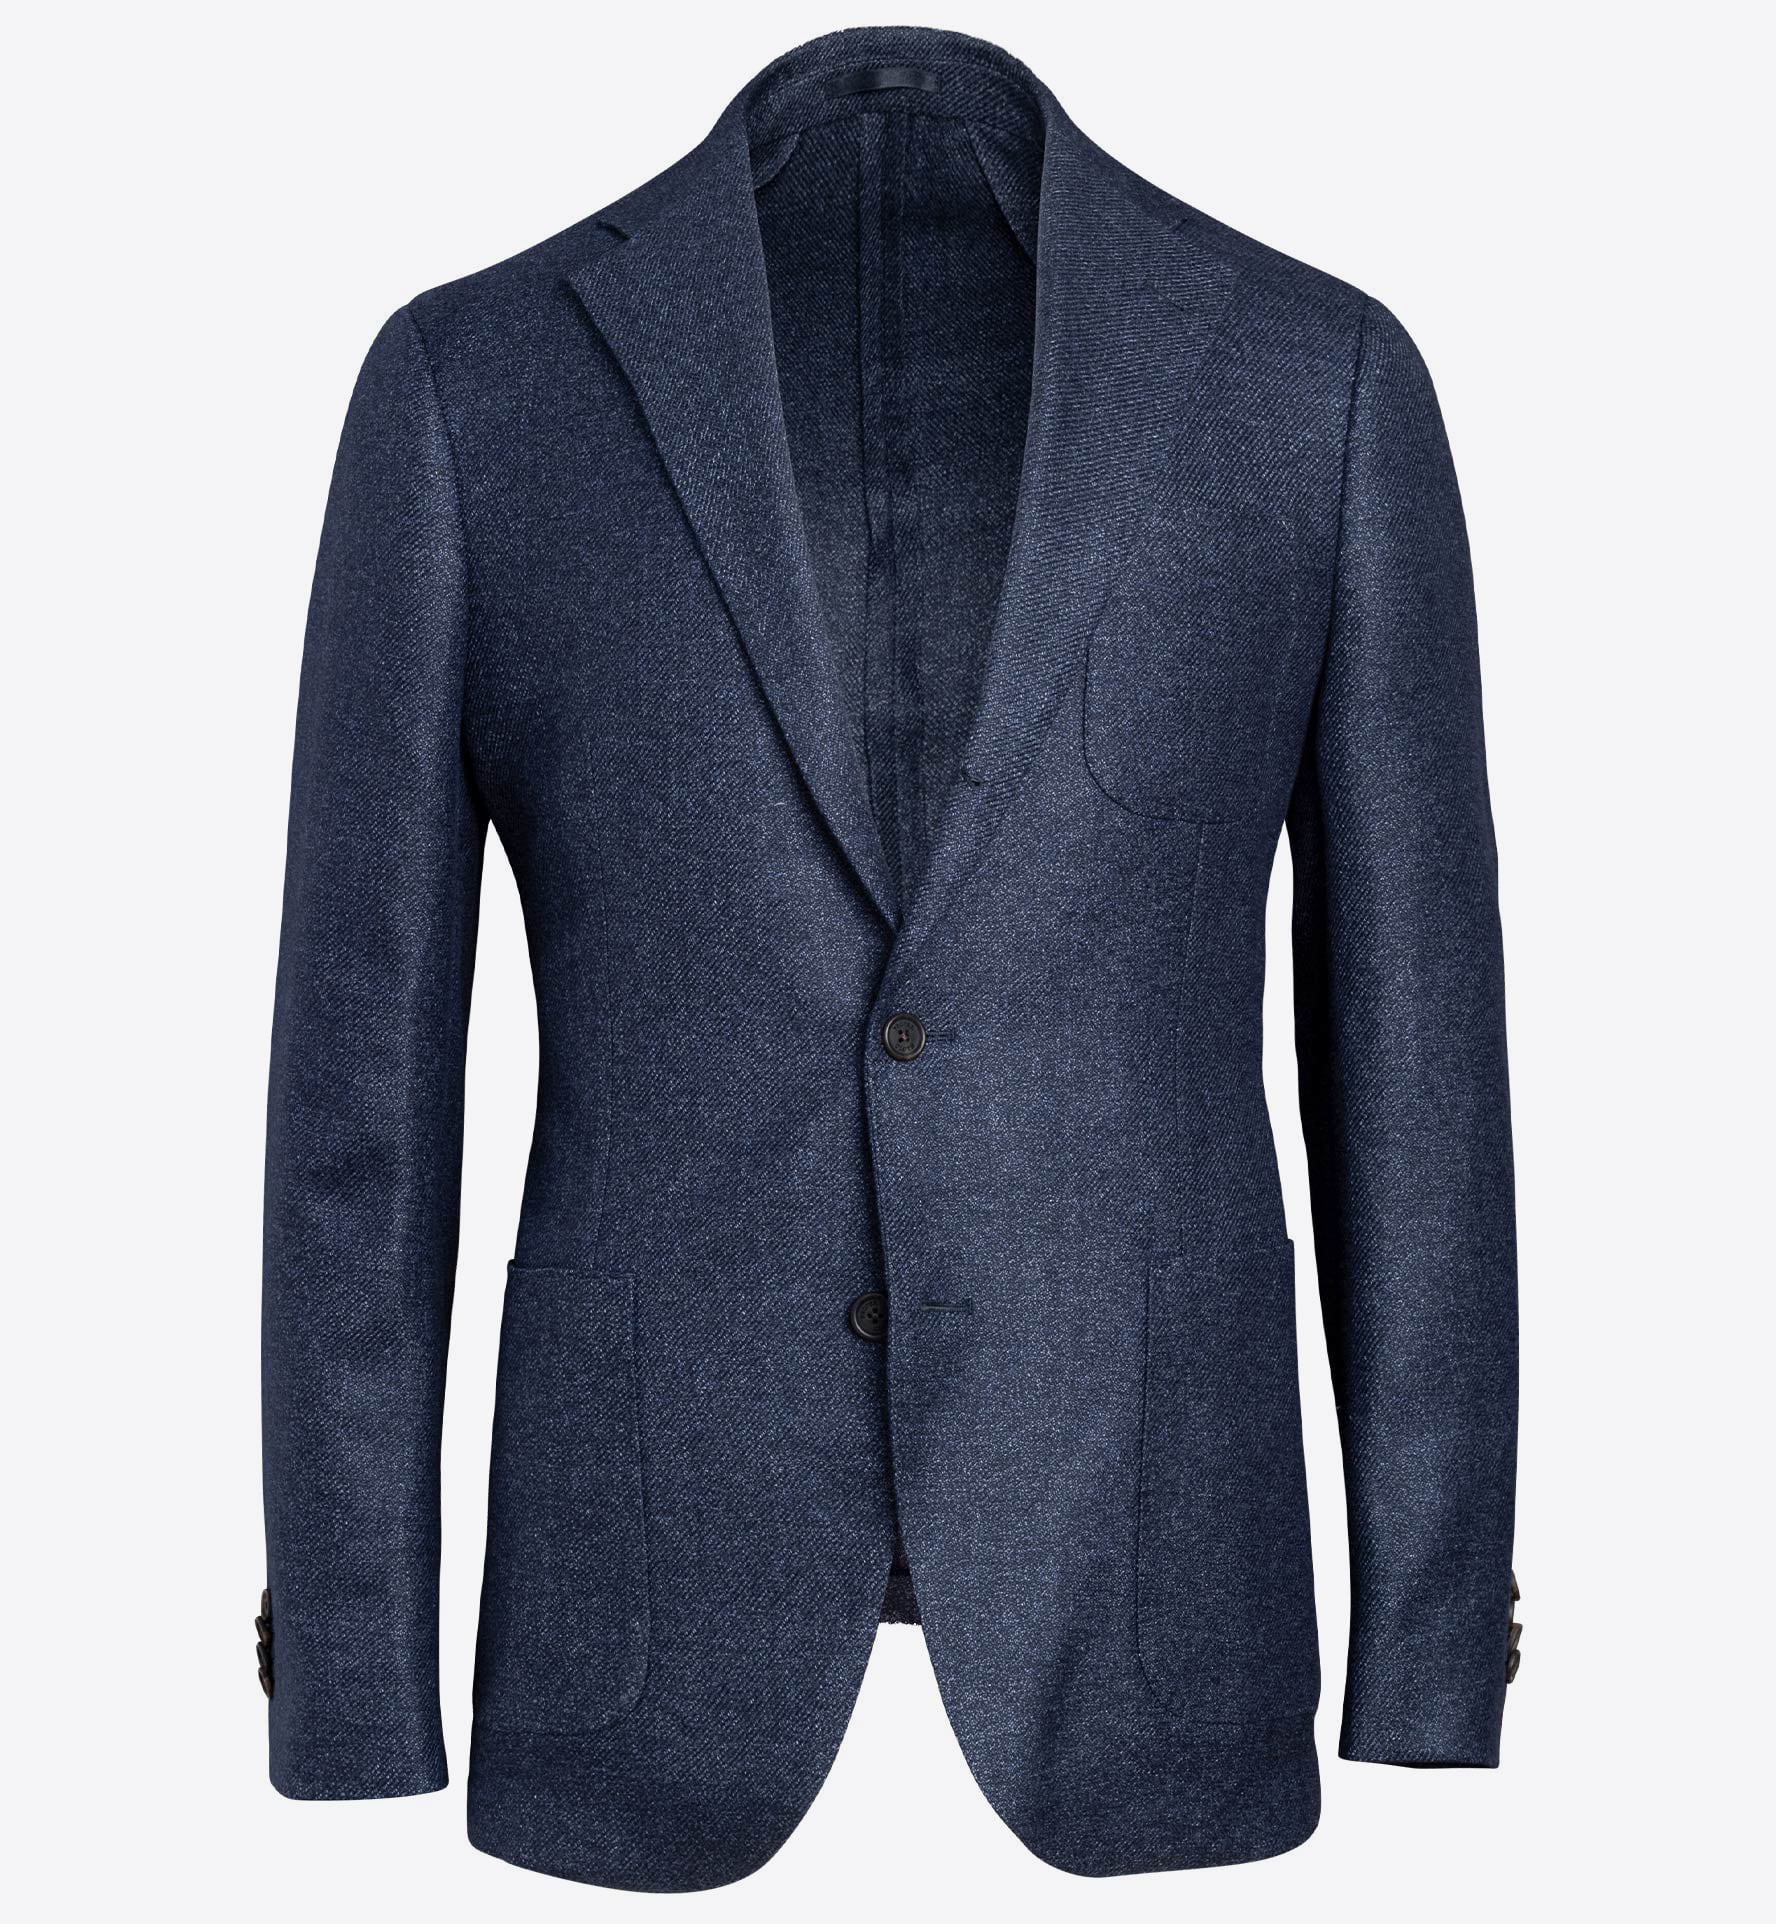 Bedford Navy Melange Wool and Linen Jacket - Custom Fit Tailored Clothing